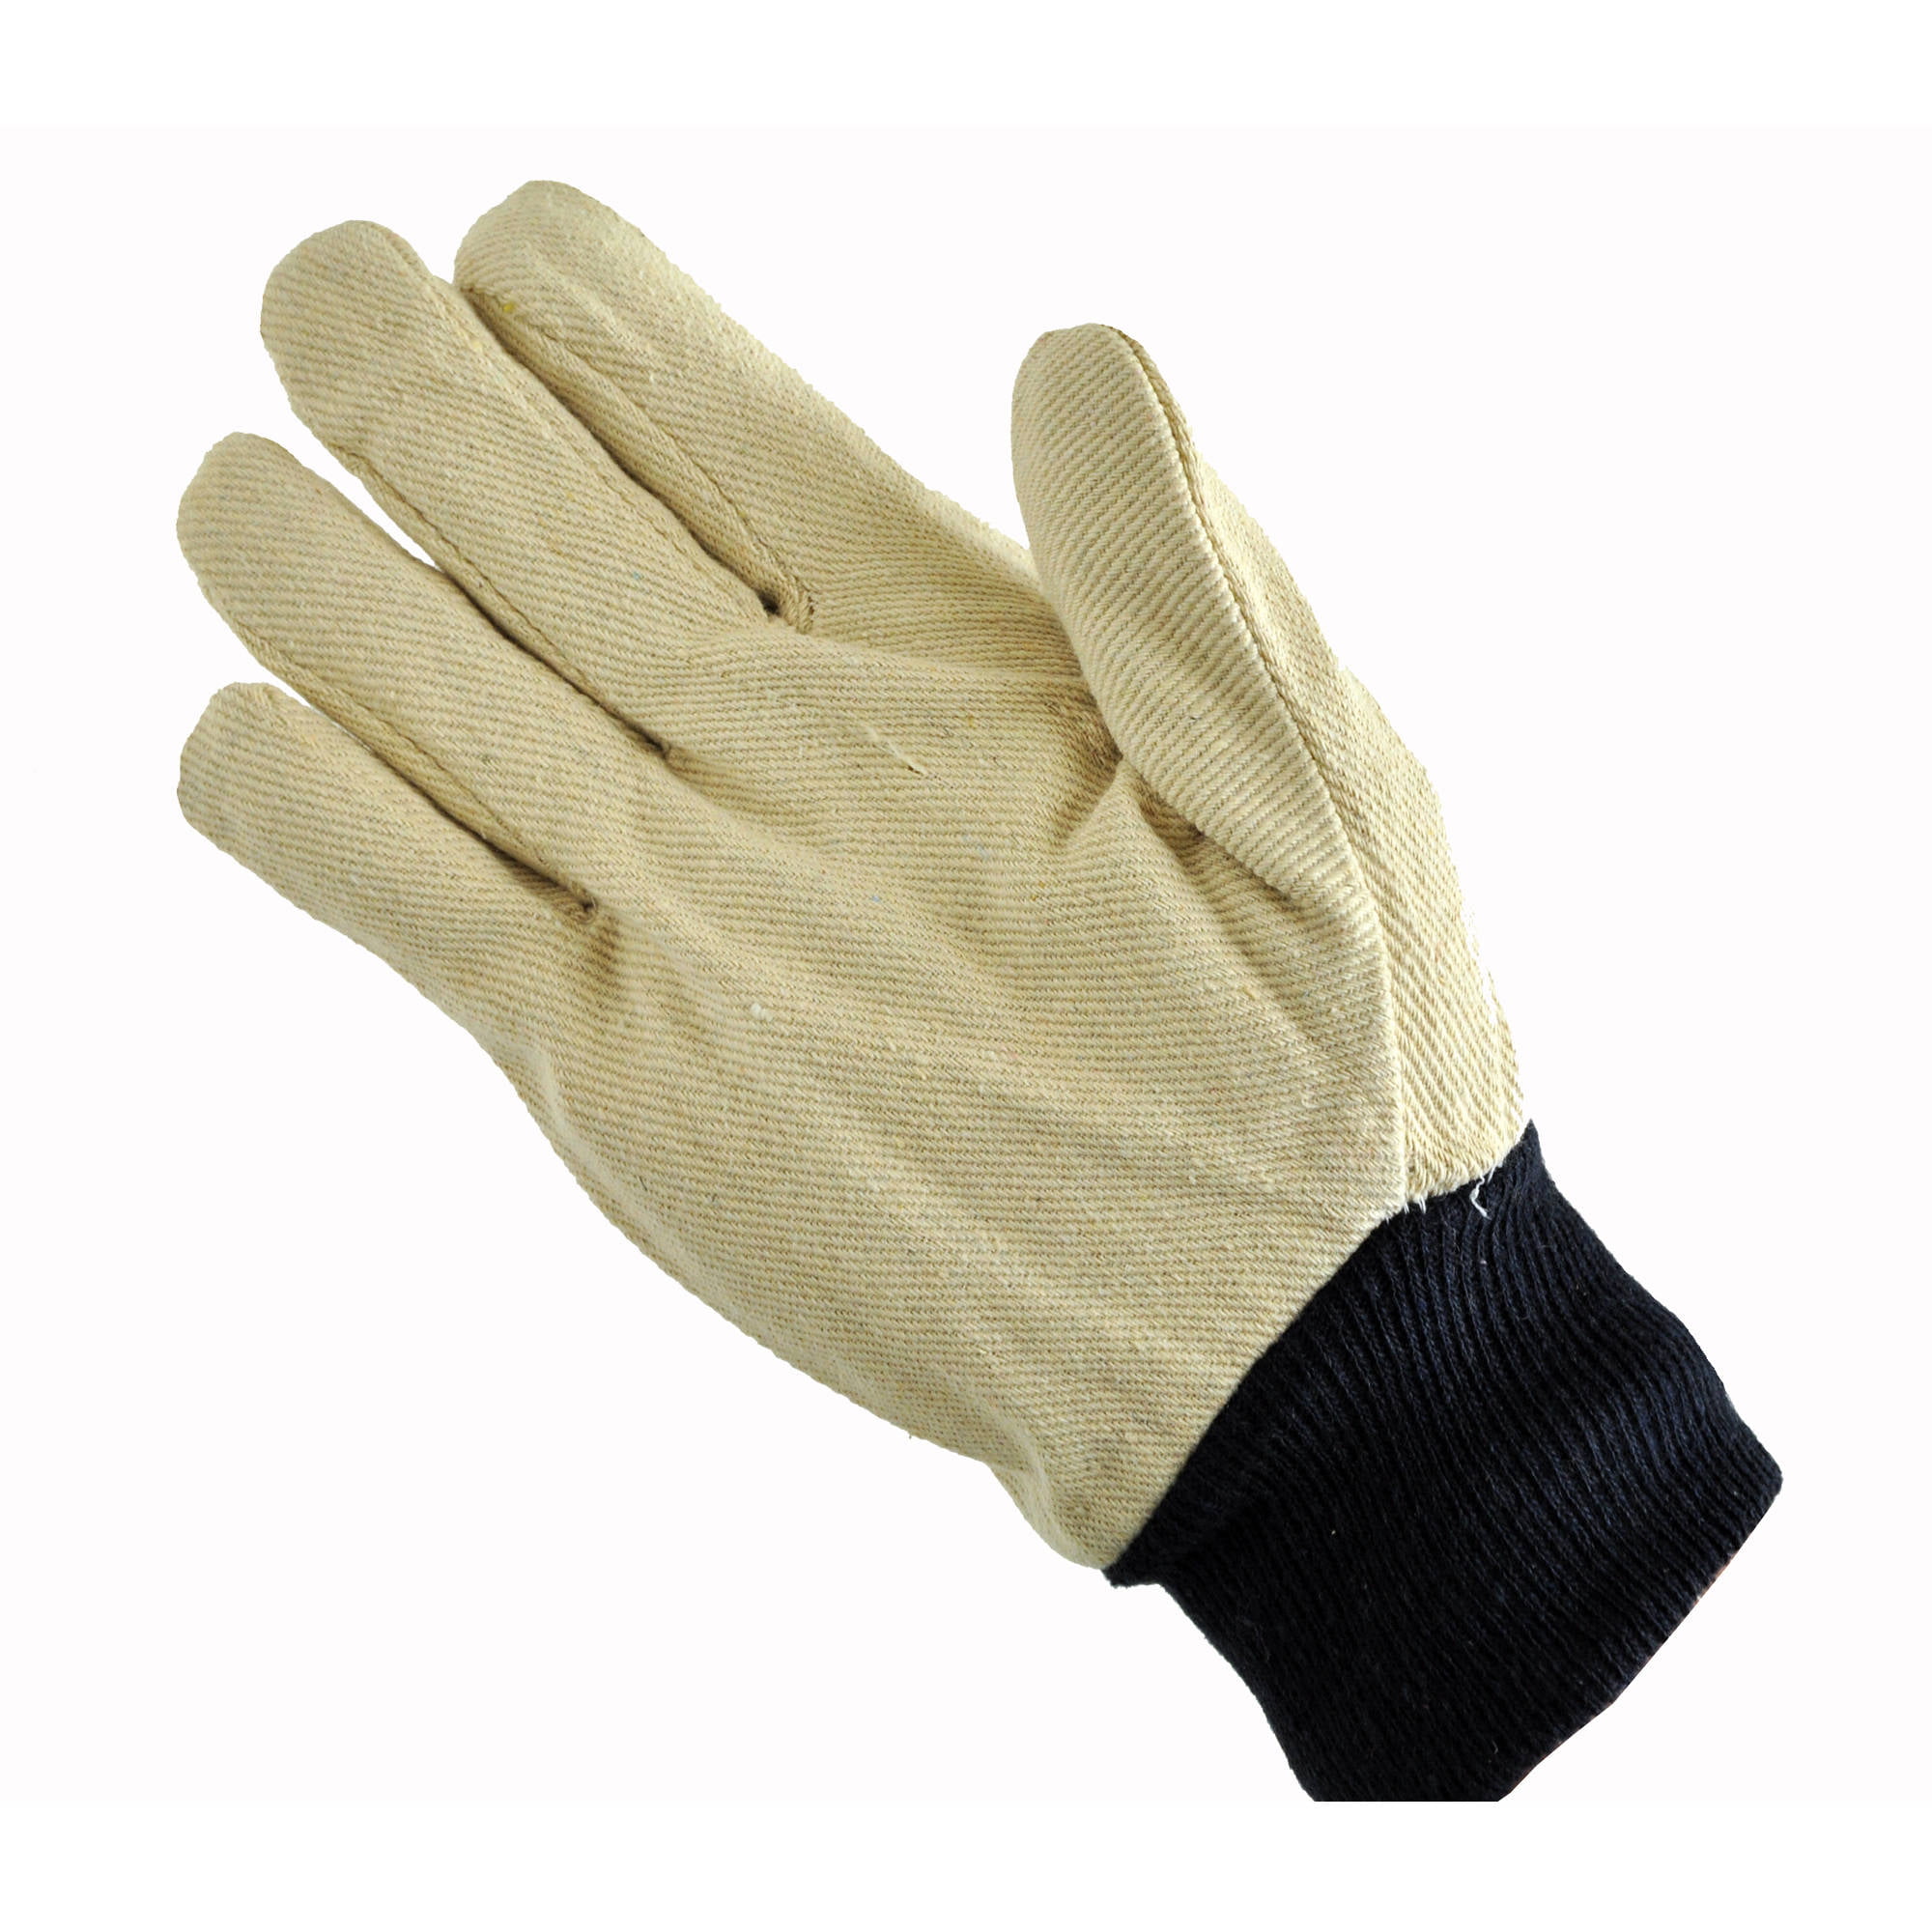 GL-07000-Z12 Pack of: 12 Men's Large 8 Ounce Cotton Canvas Gloves